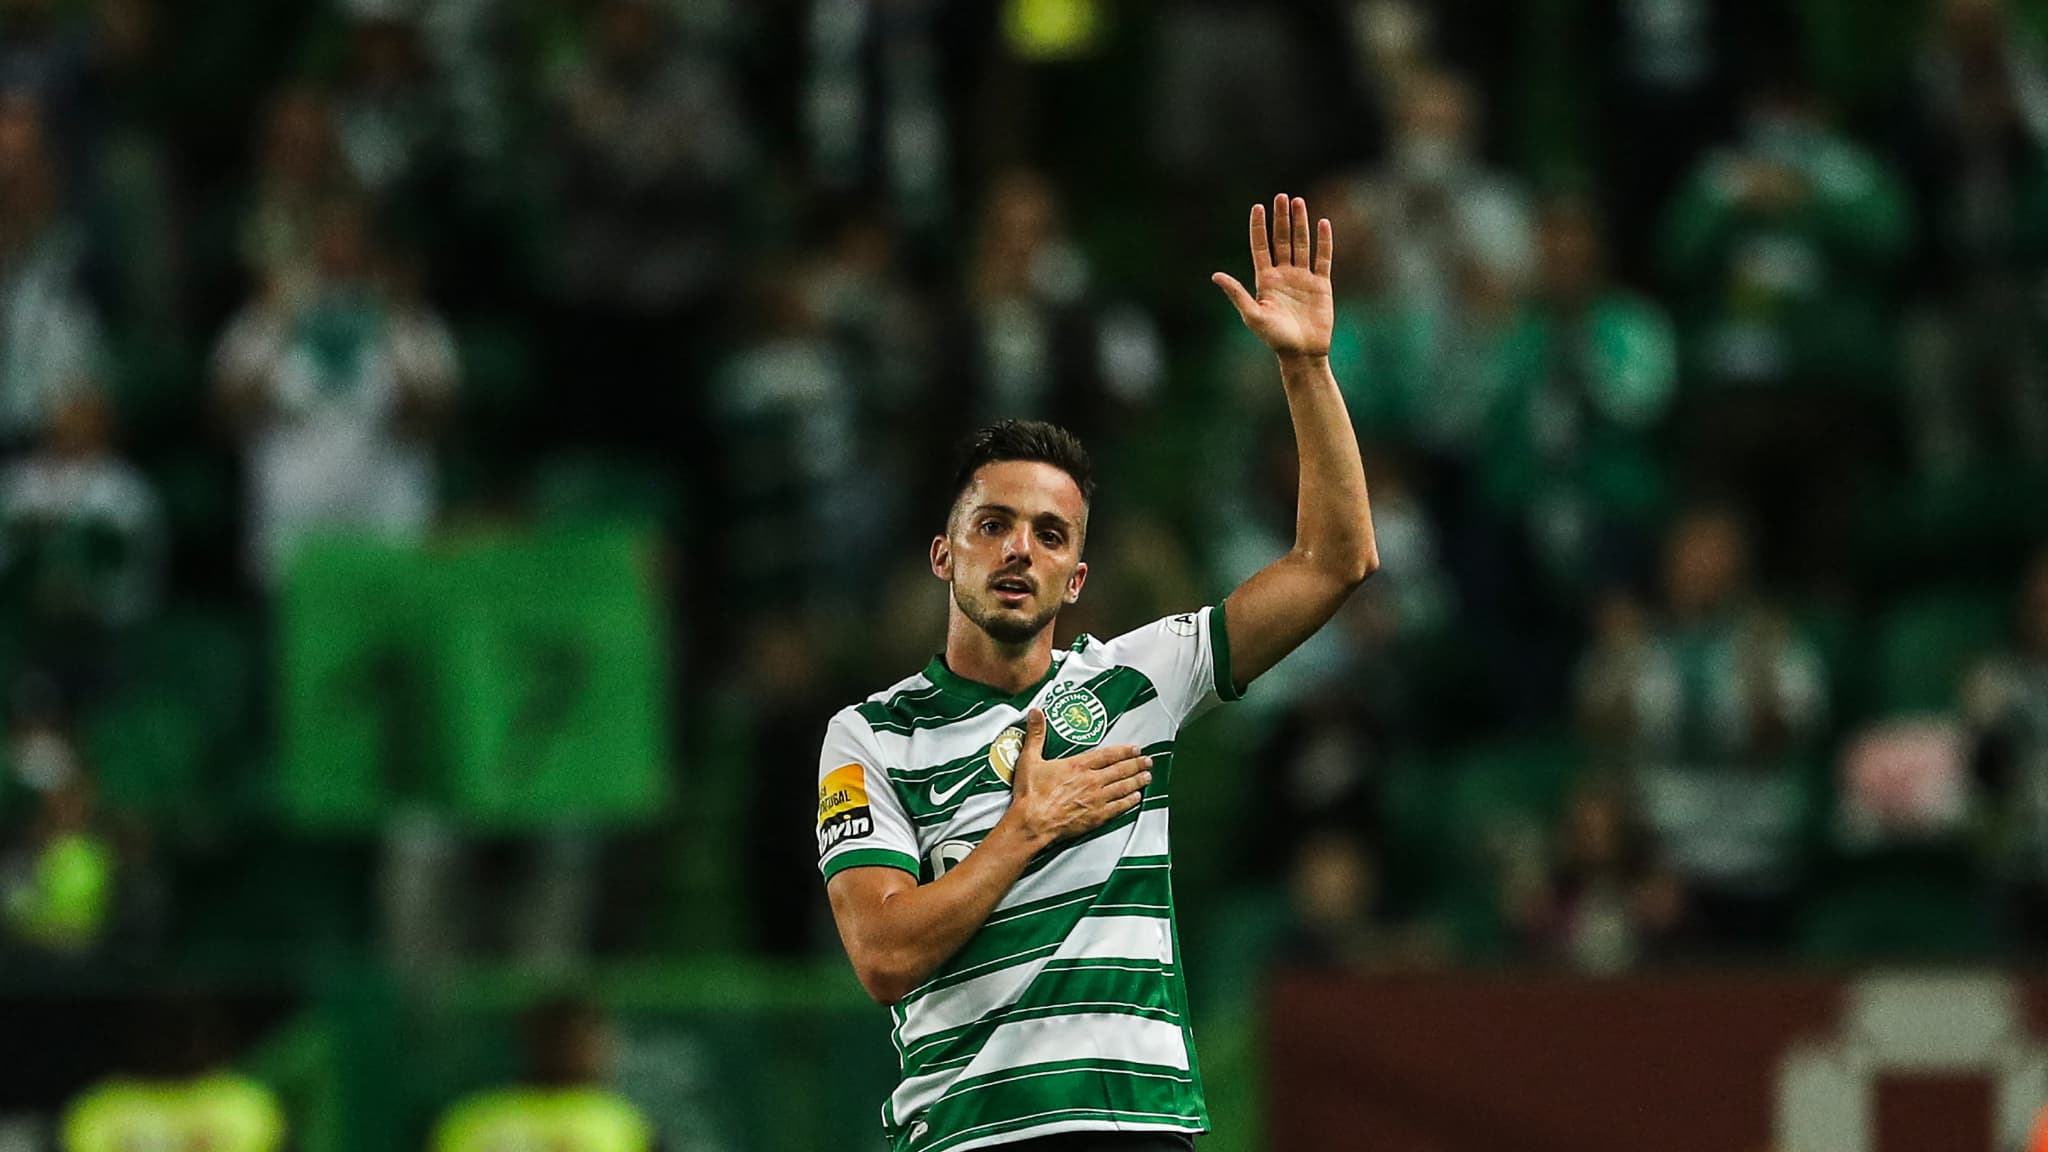 Big affection for Sarabia, applause for his last match with Sporting